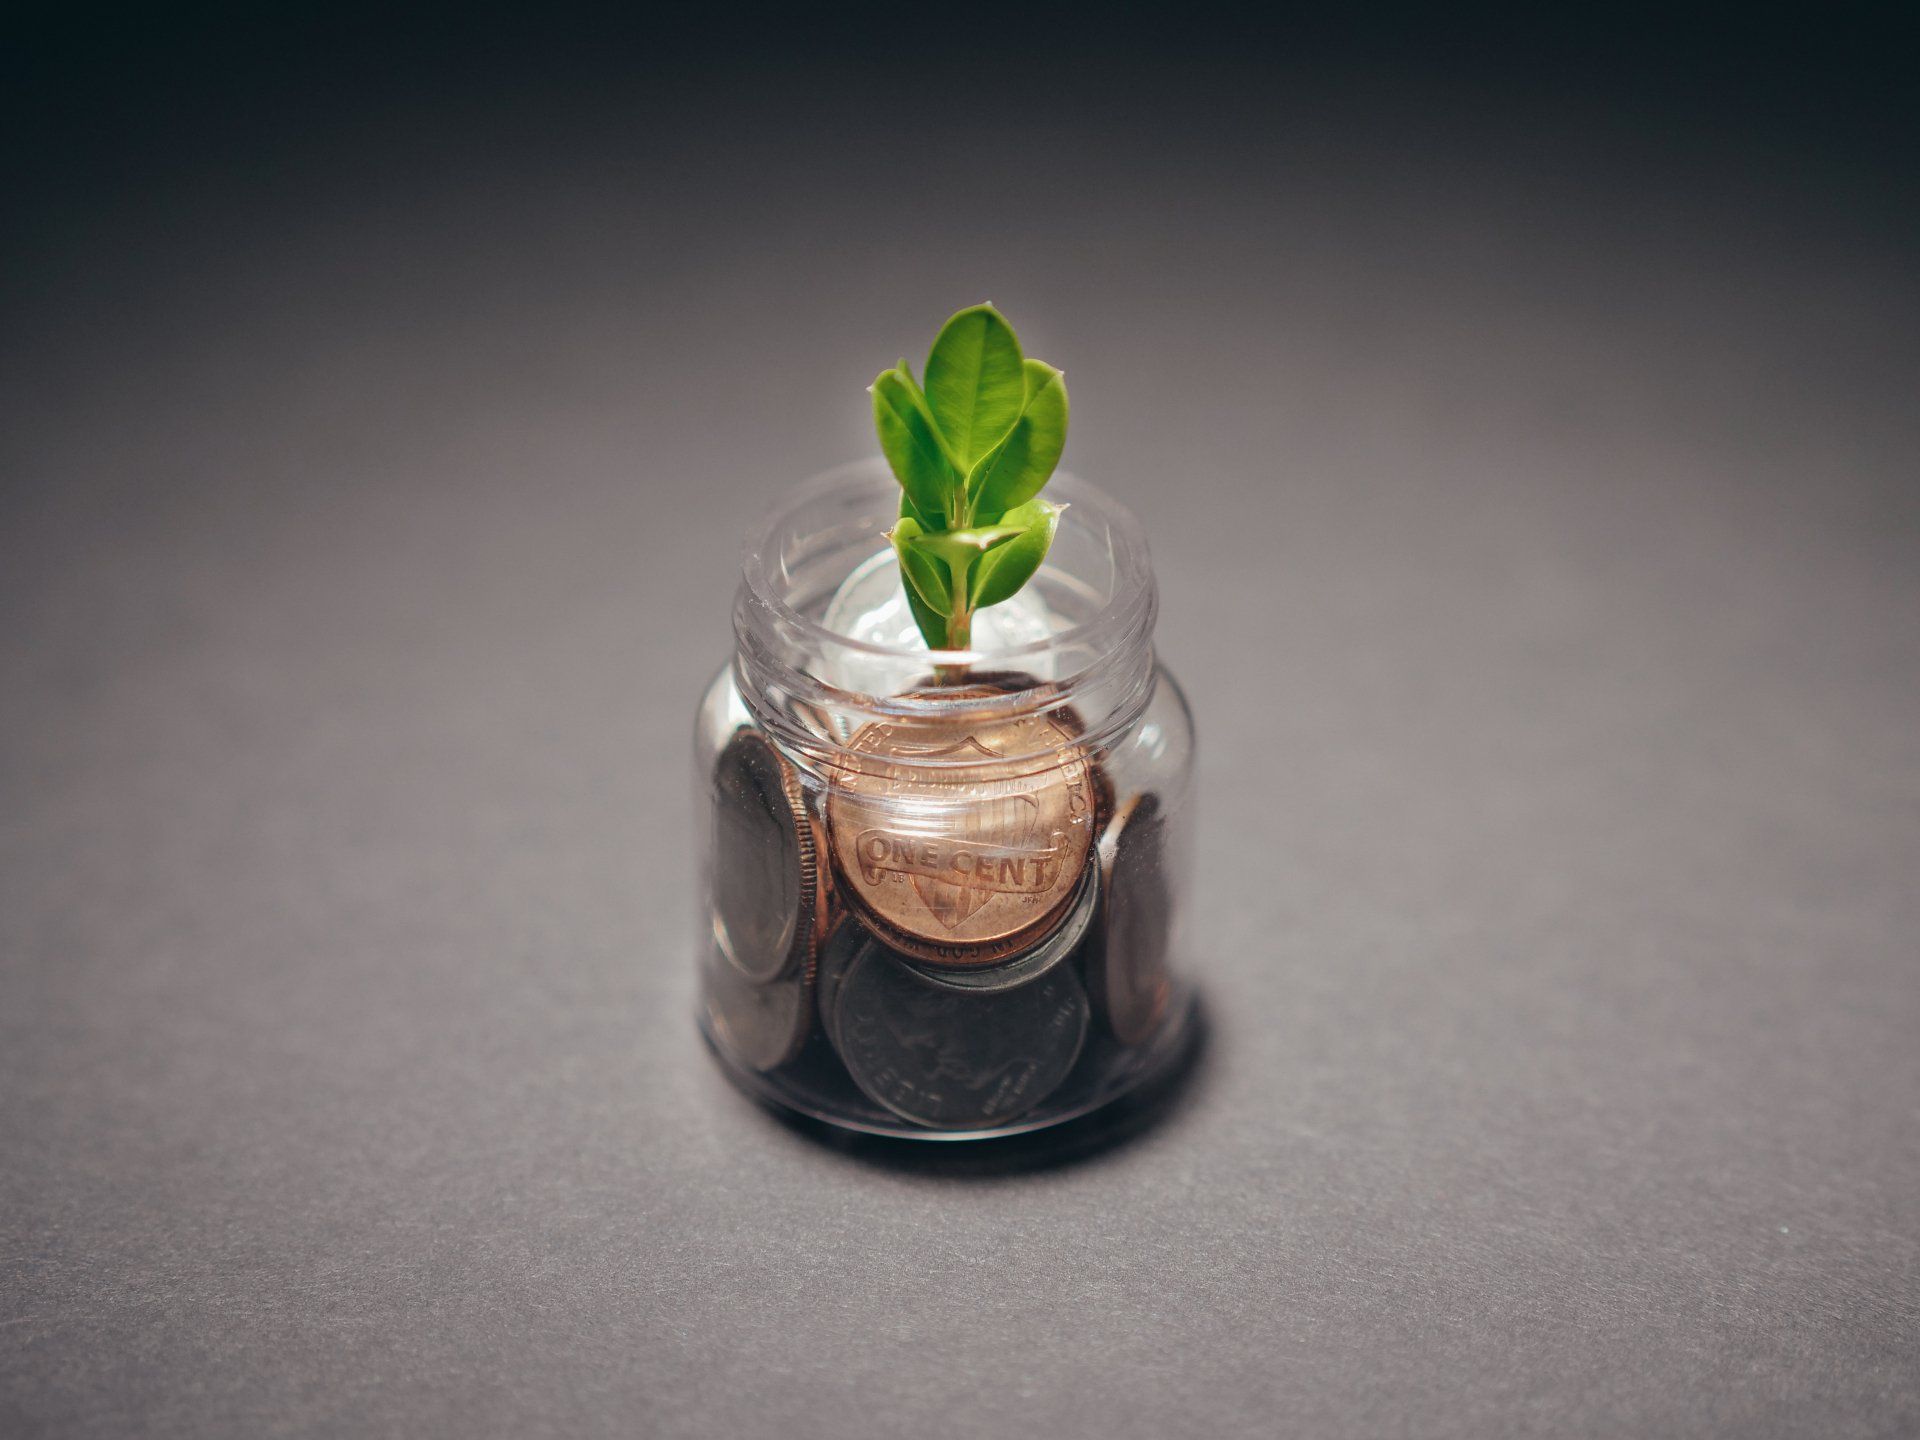 Small glass jar filled with coins and with a small plant growing out the top of the jar